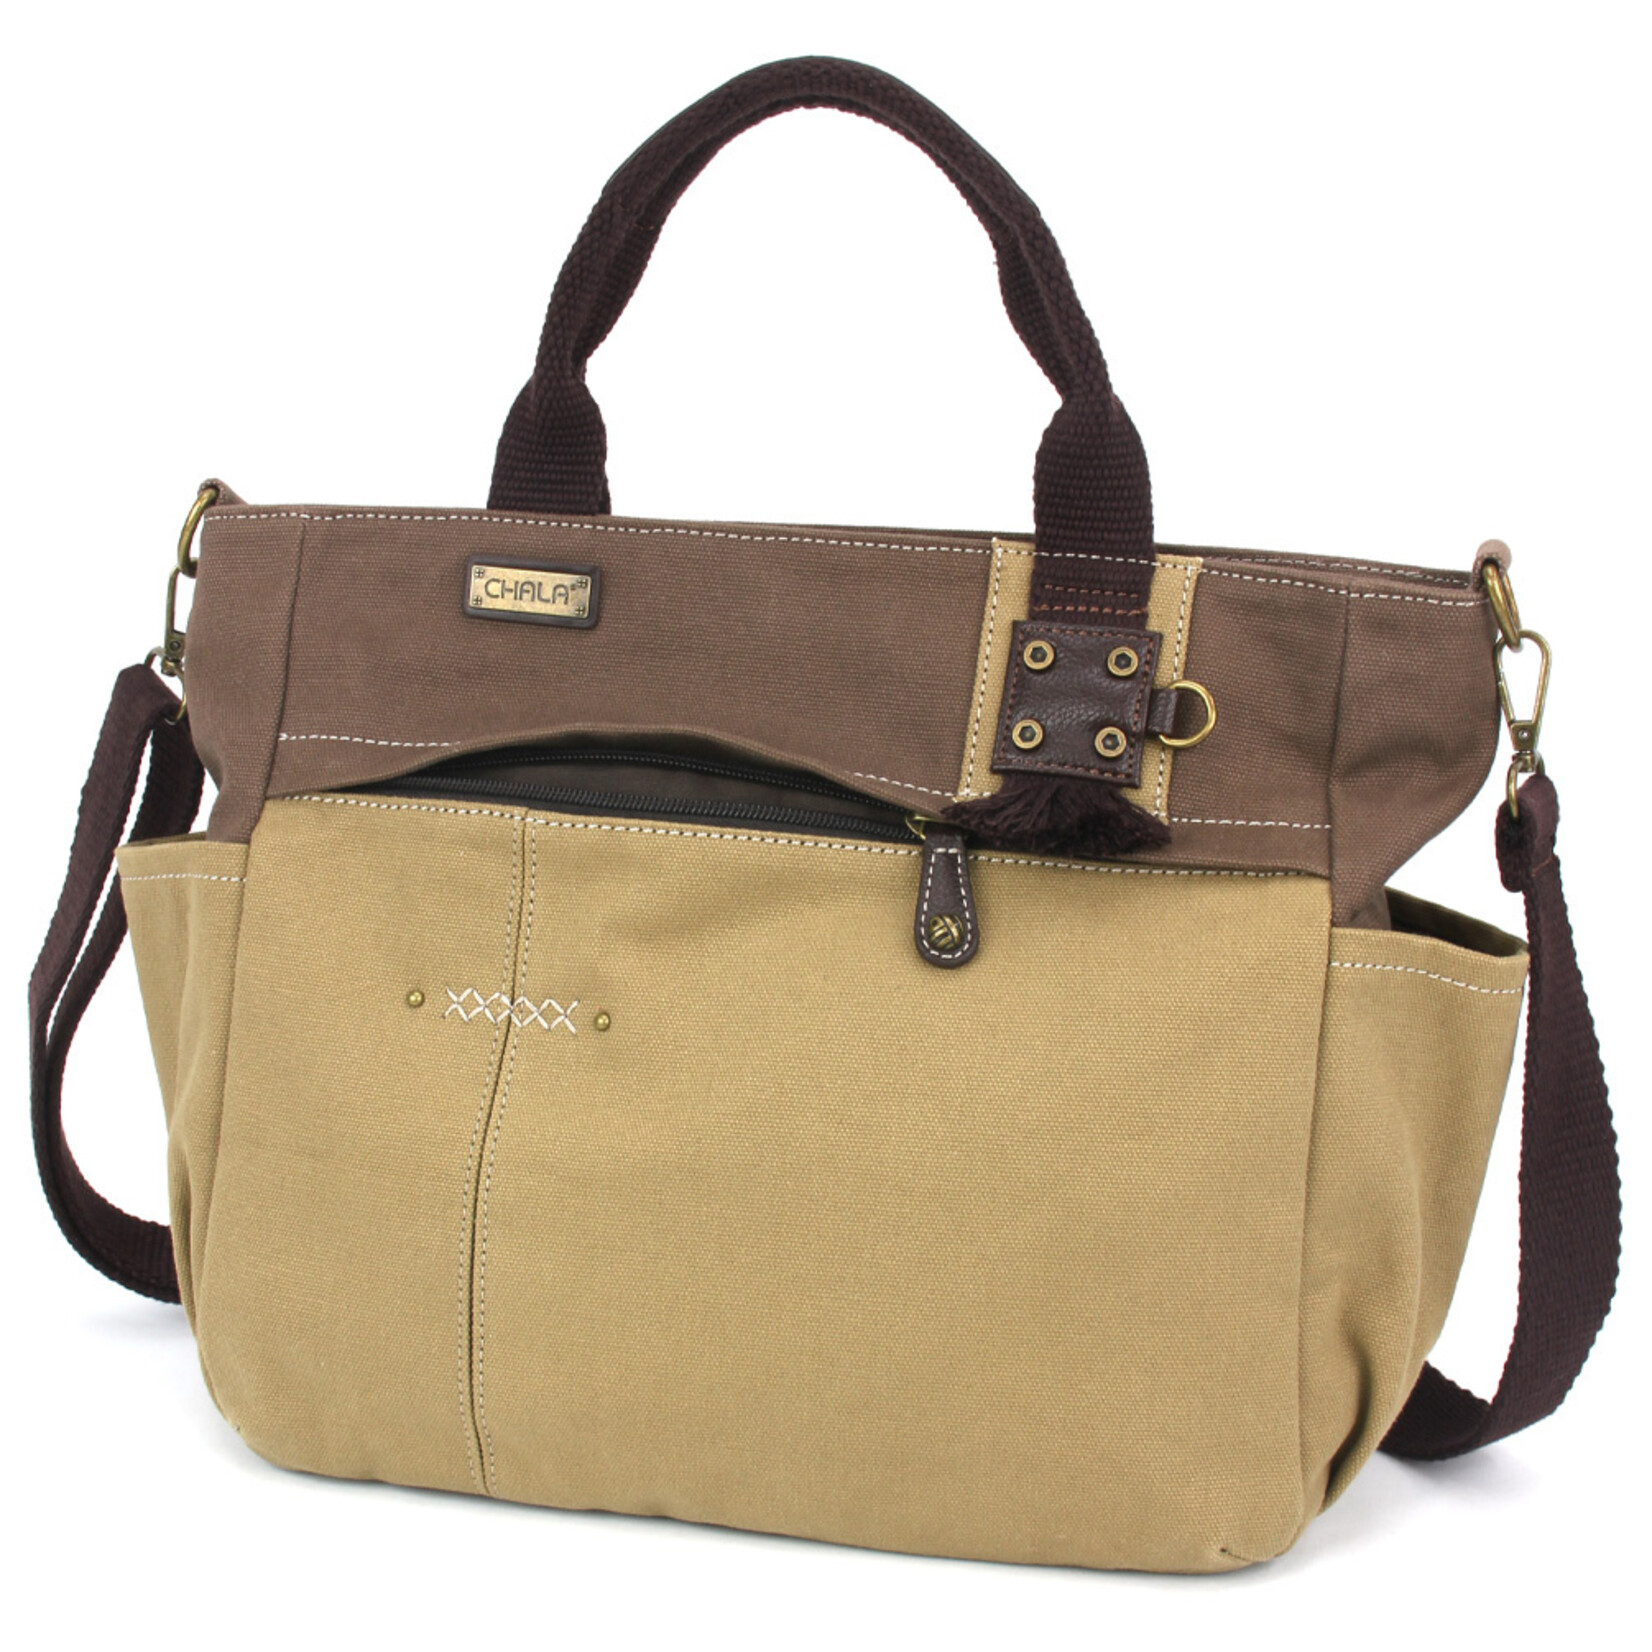 Chala Multi Pocket Tote - Olive - Metal Charming Feather